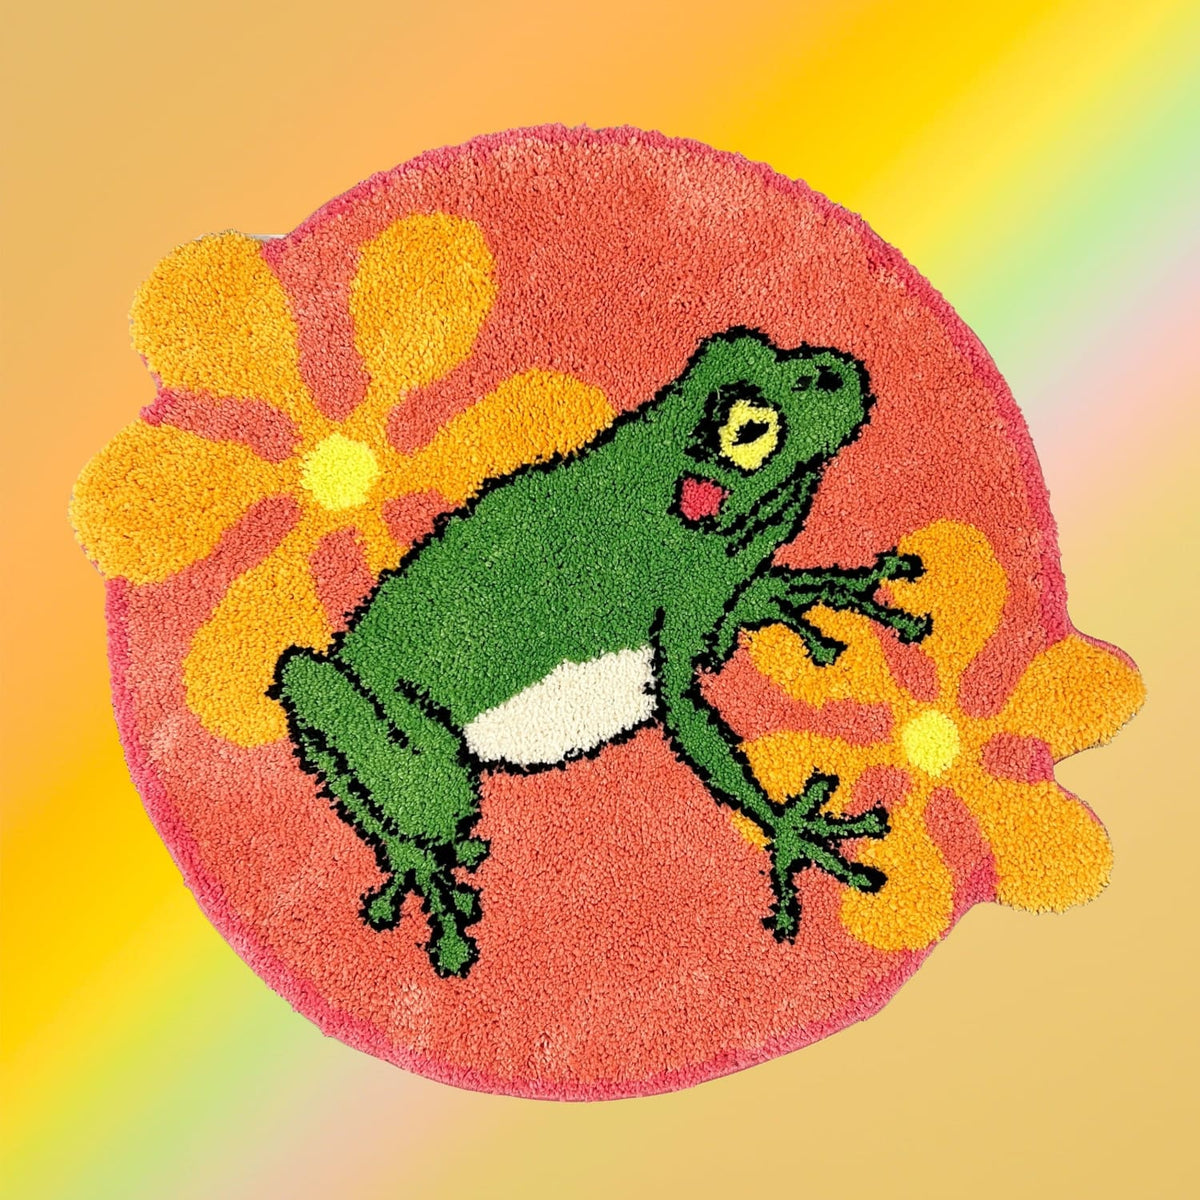 Frog Accent Rug Accent Rug - Frog - Retro - Home Decor